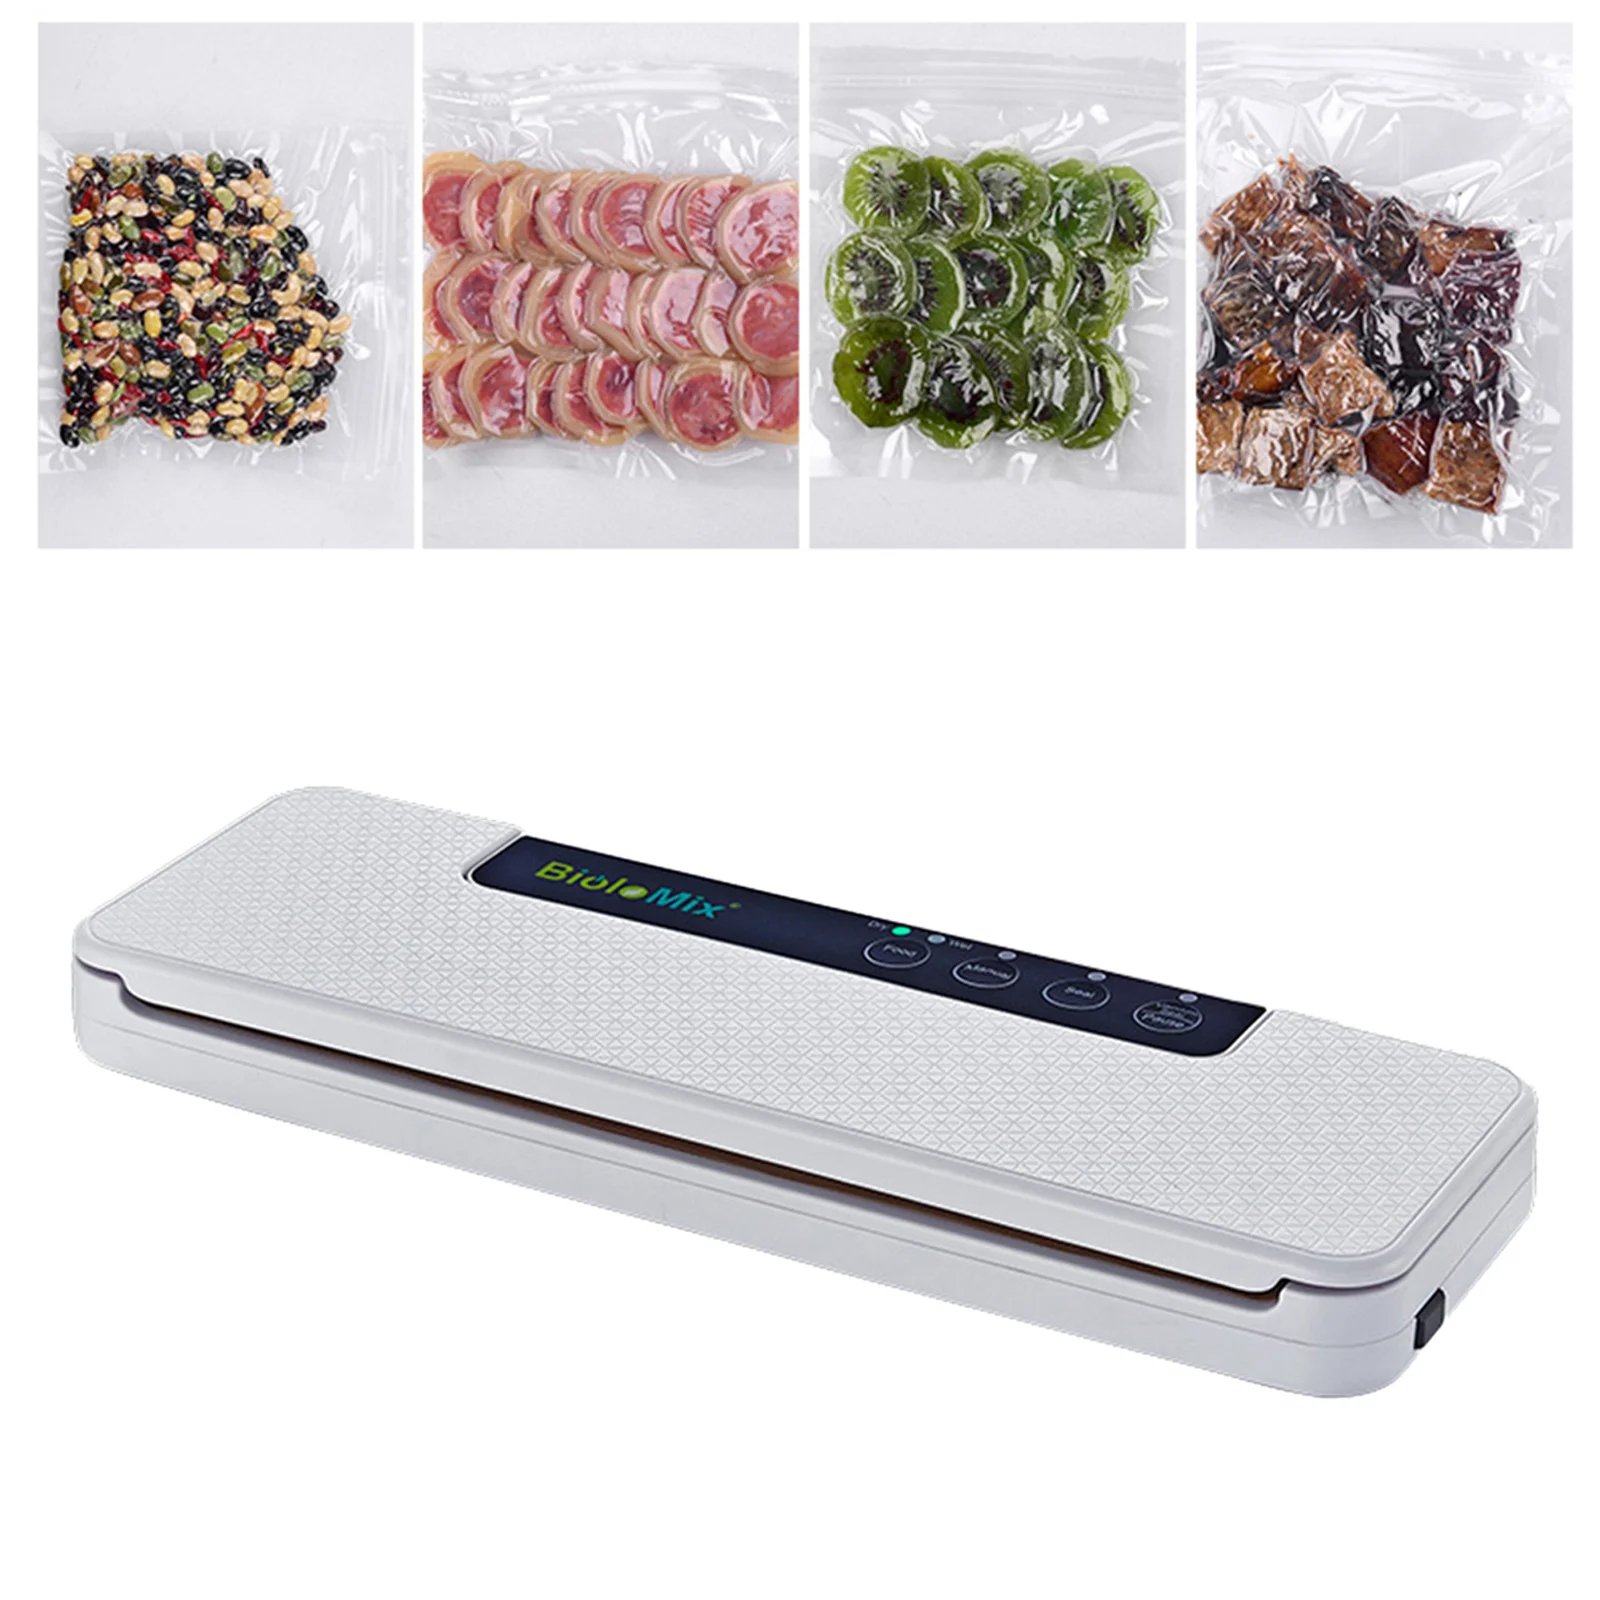 

Electric Vacuum Sealer Food Packing Machine w/ Seal Bags Portable Food Saver Food Preservation for Wet and Dry Foods UK Adapter